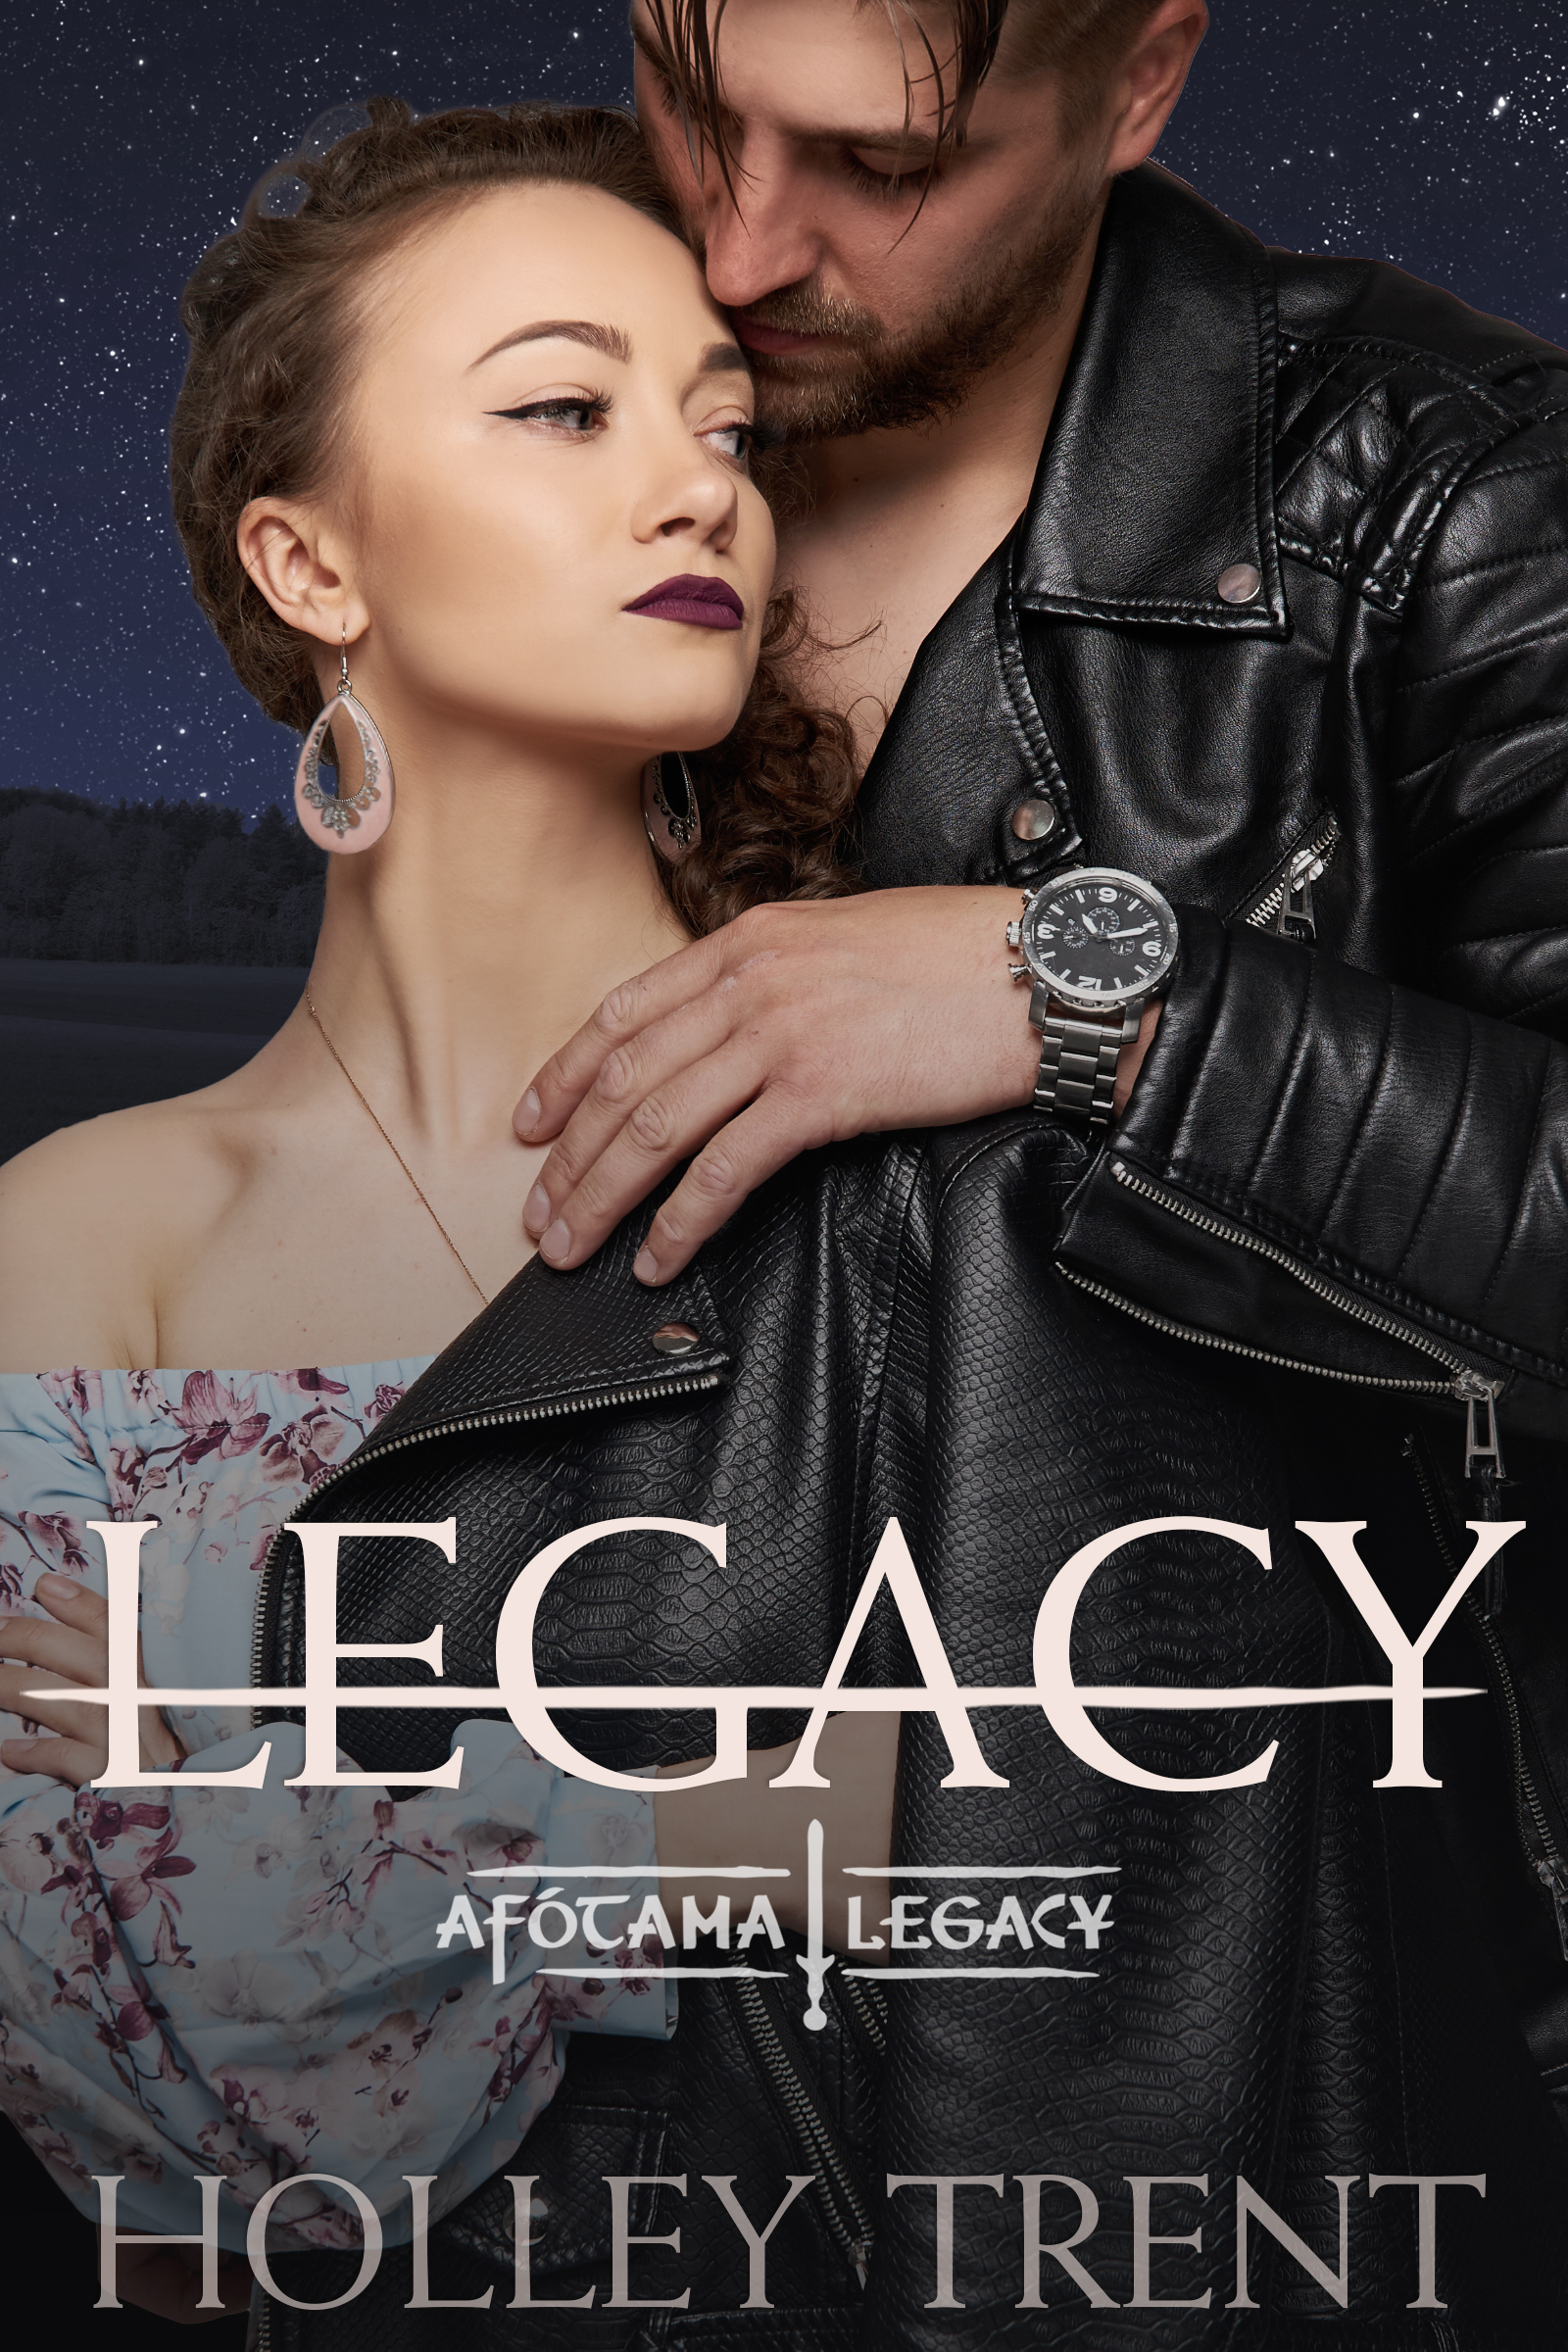 Cover of The Afotama Legacy book entitled Legacy. Has a man in black leather jacket embracing a shorter woman in pastel dress.